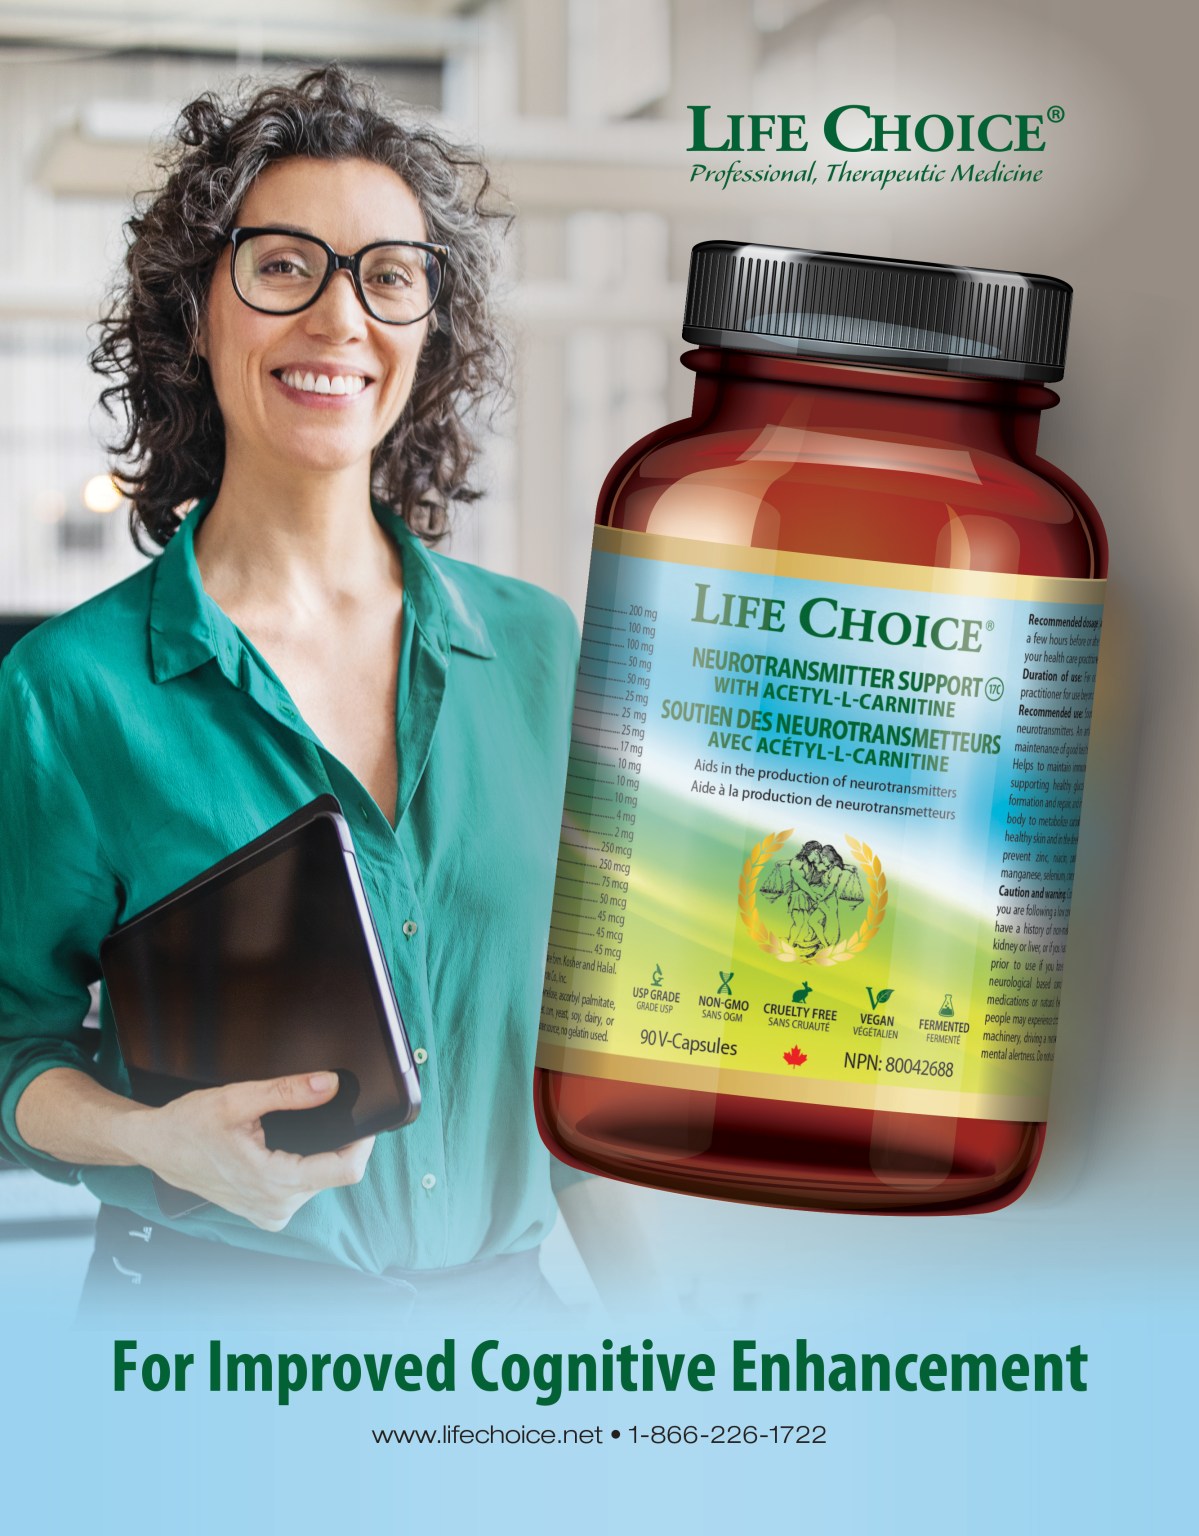 Life Choice Neurotransmitter Support with Acetyl-L-Carnitine (90 VCaps)